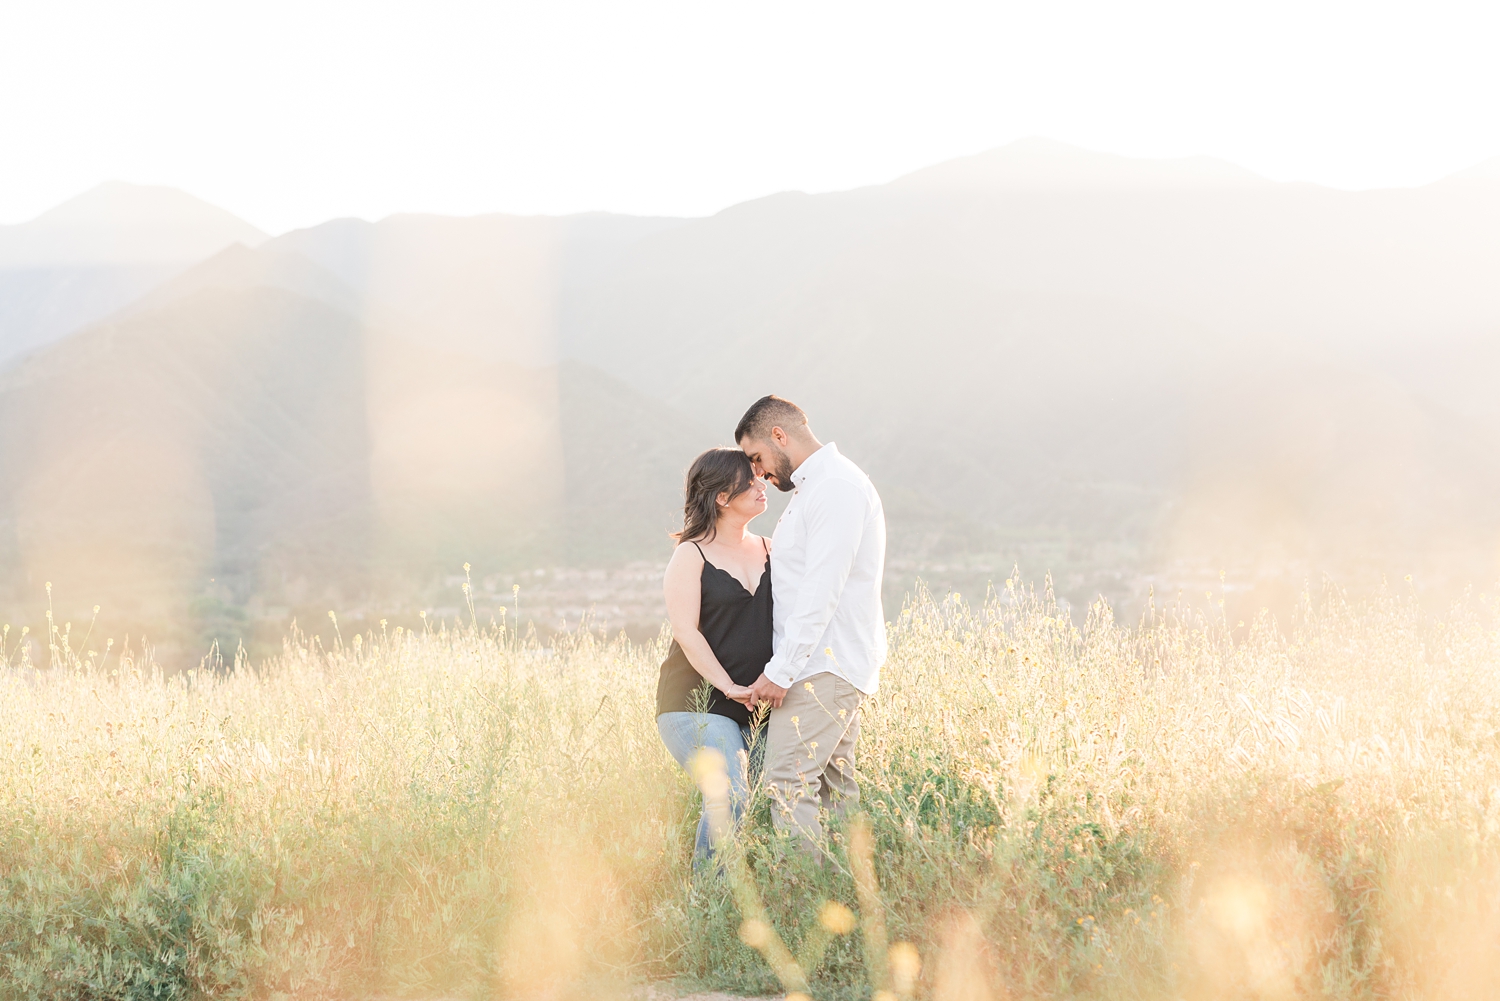 Location ideas for engaged couples 